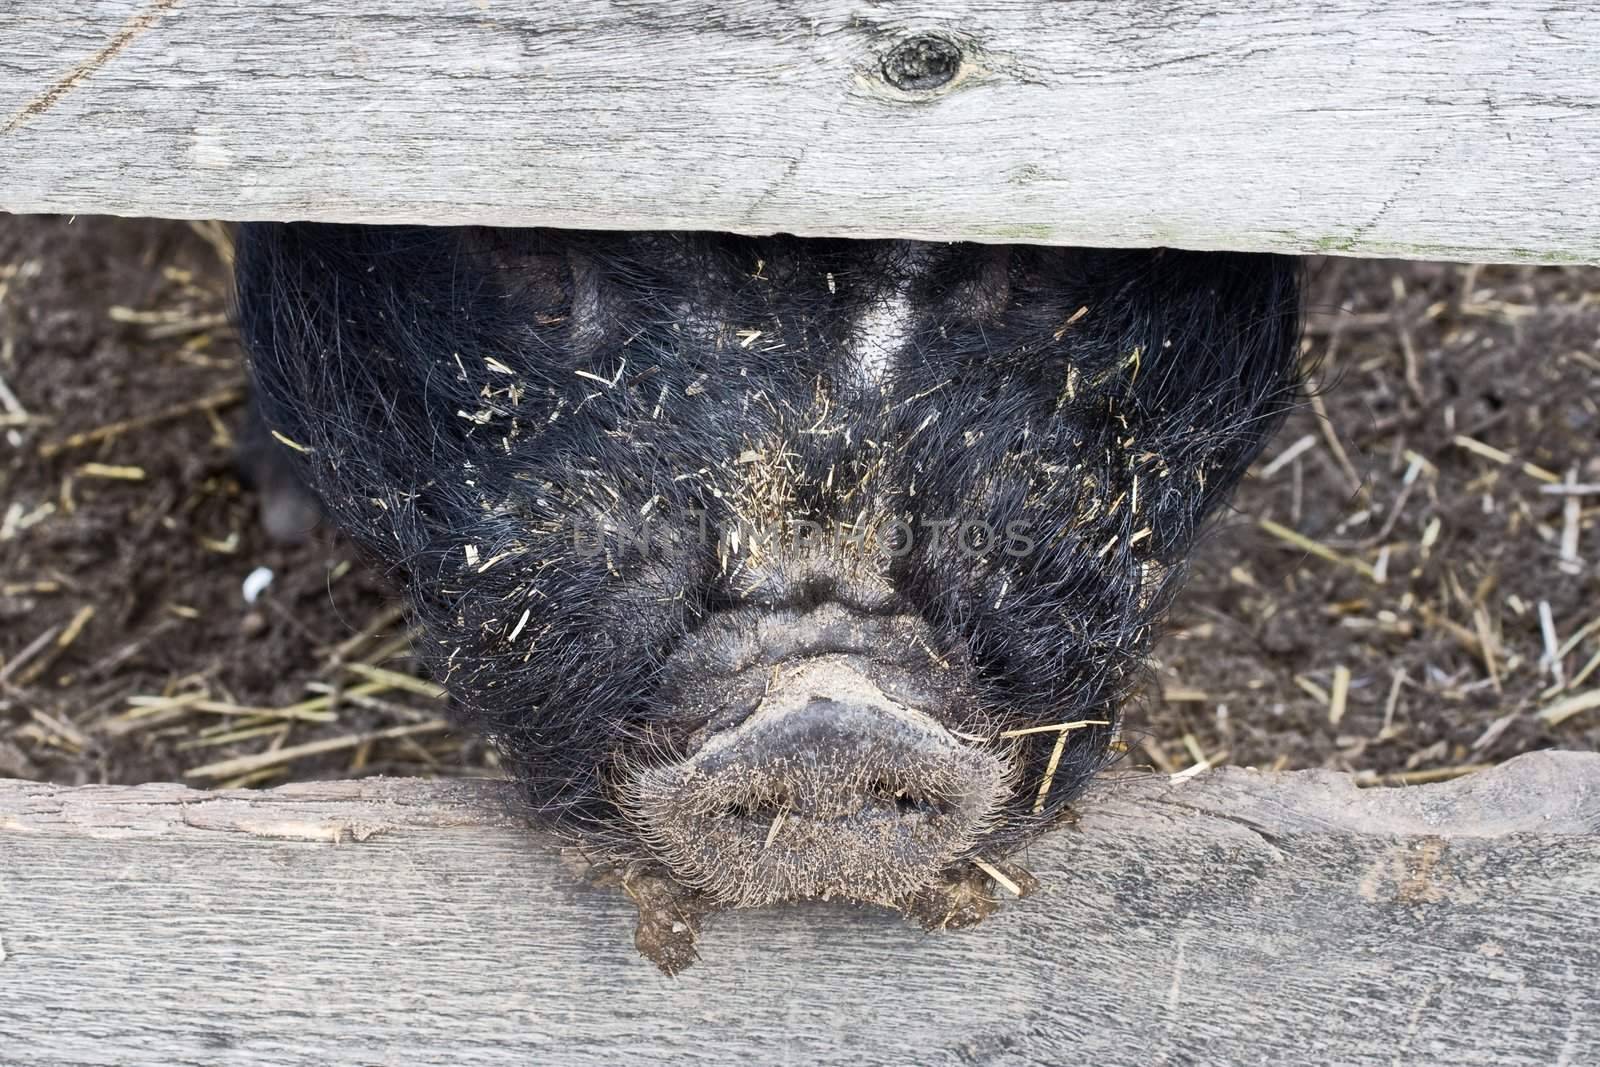 A pig sticking his snout through a fence